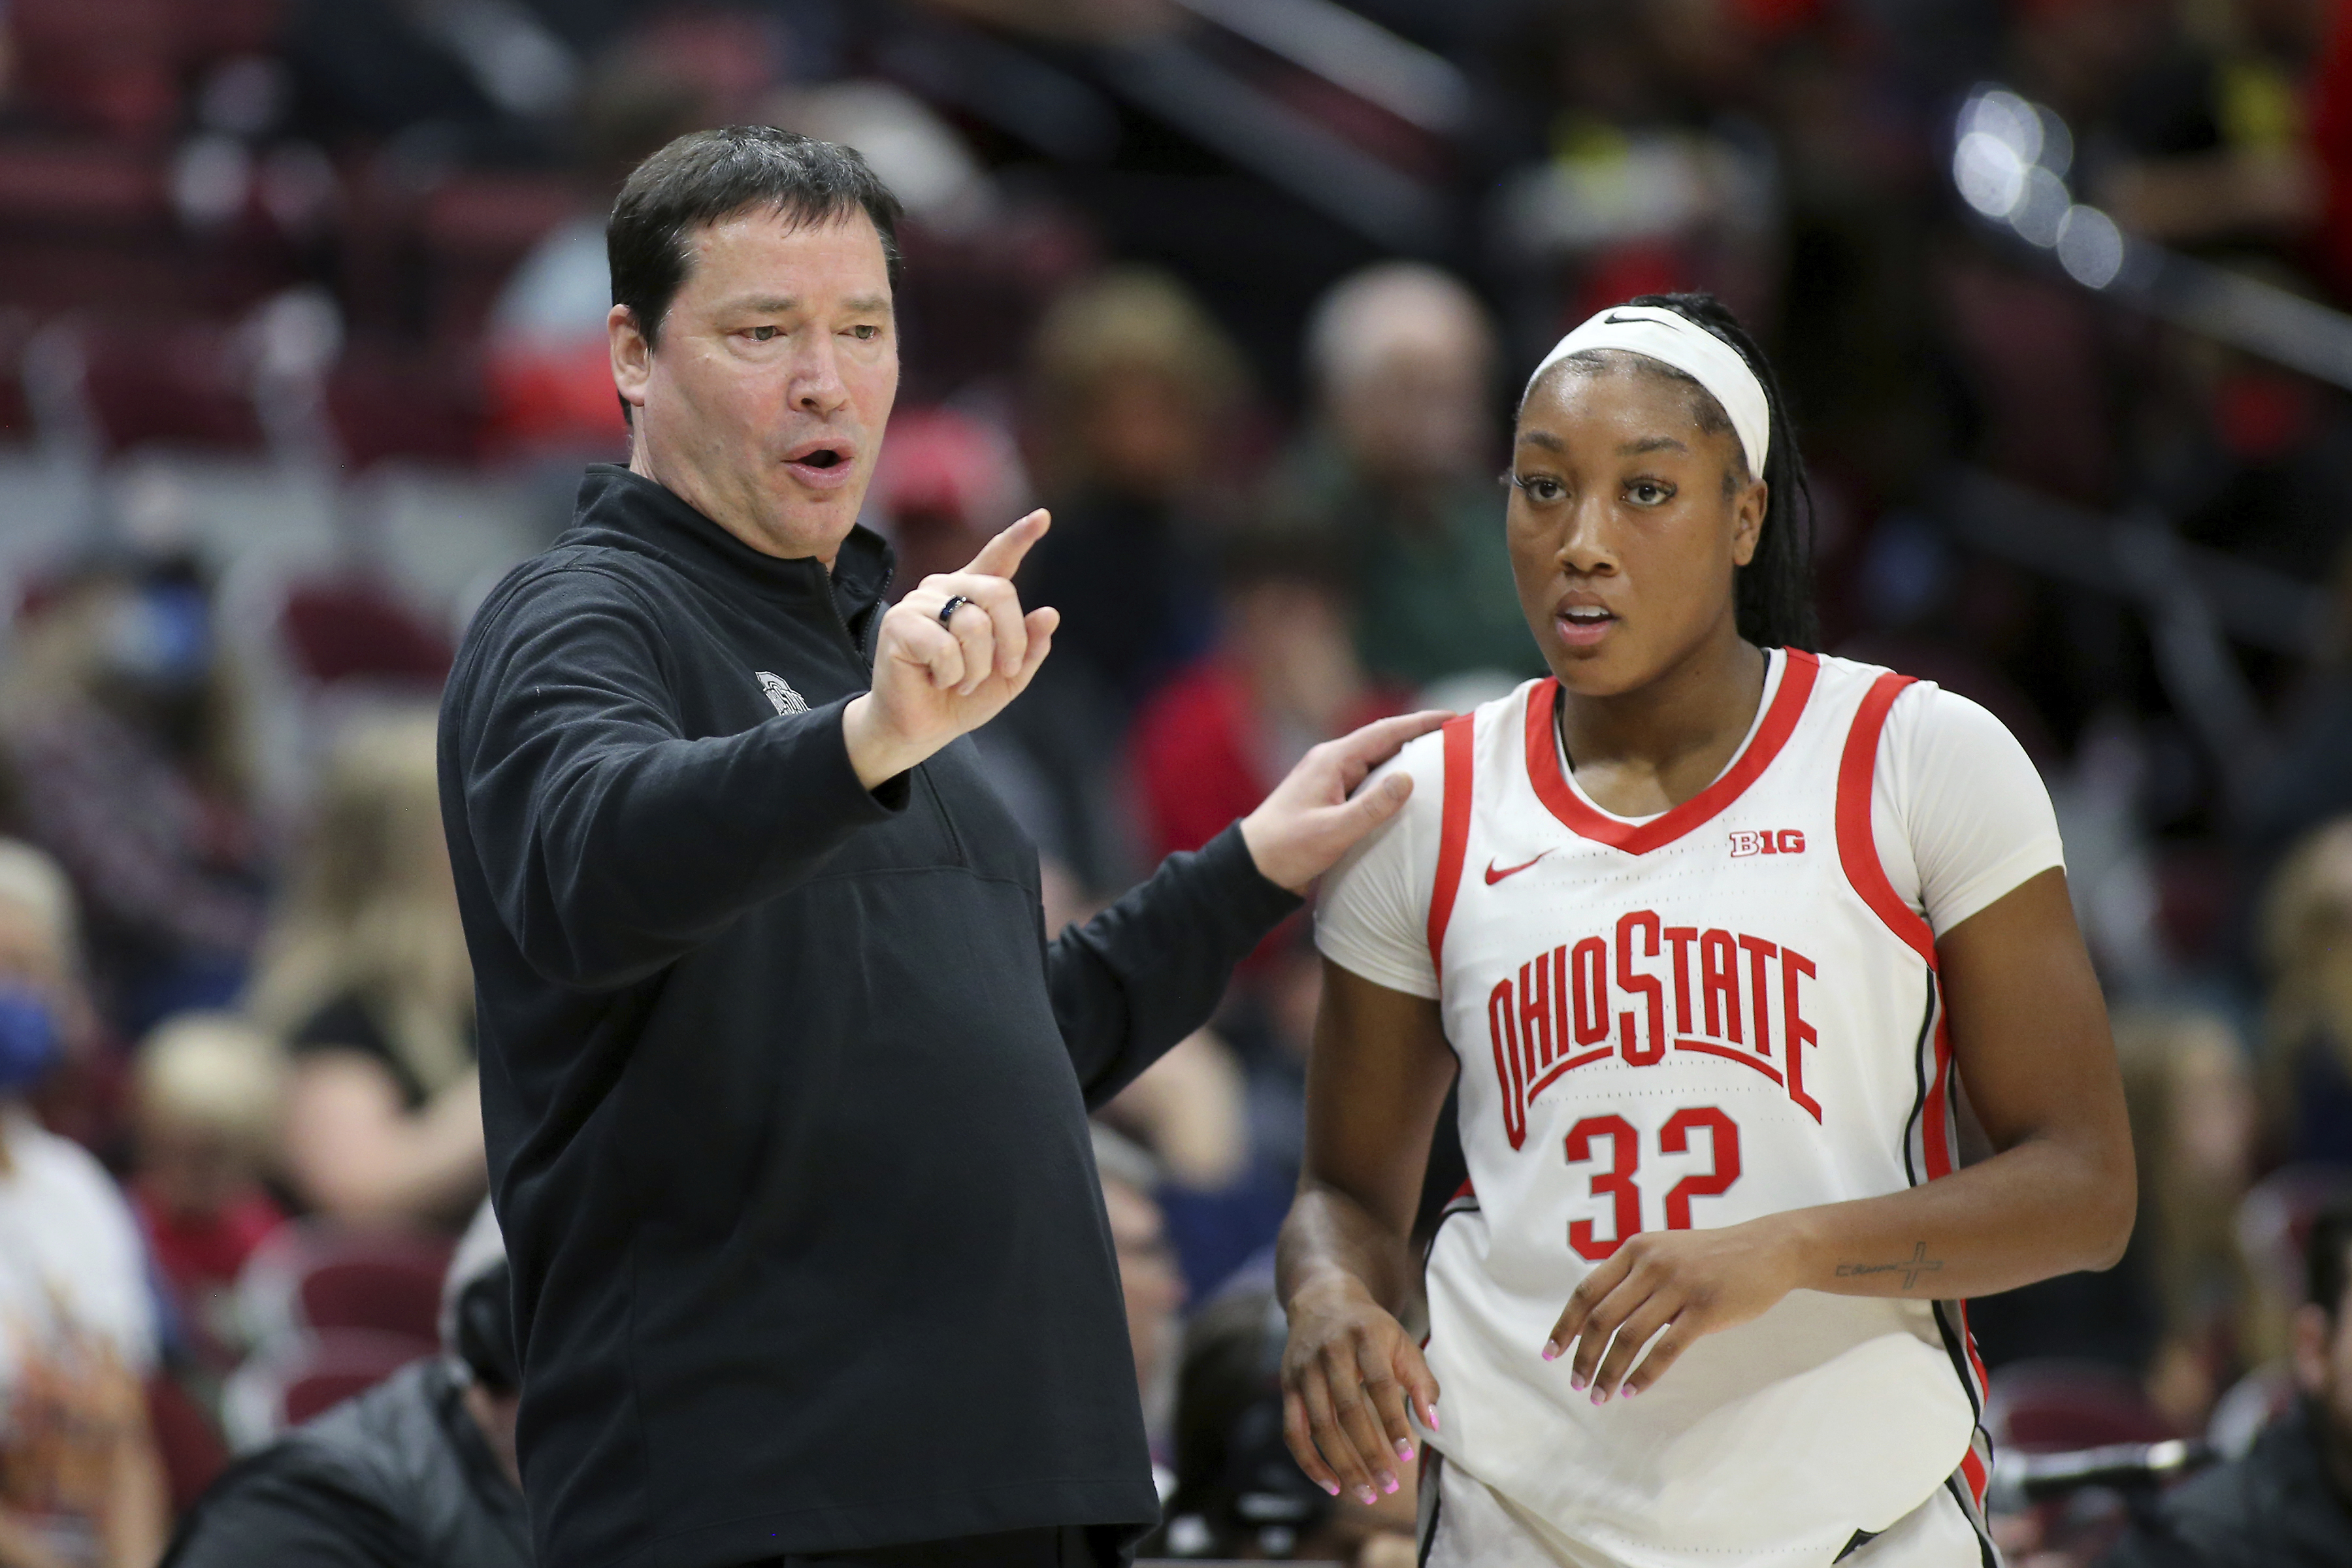 5 things to know about Ohio State's unbeaten women's basketball team